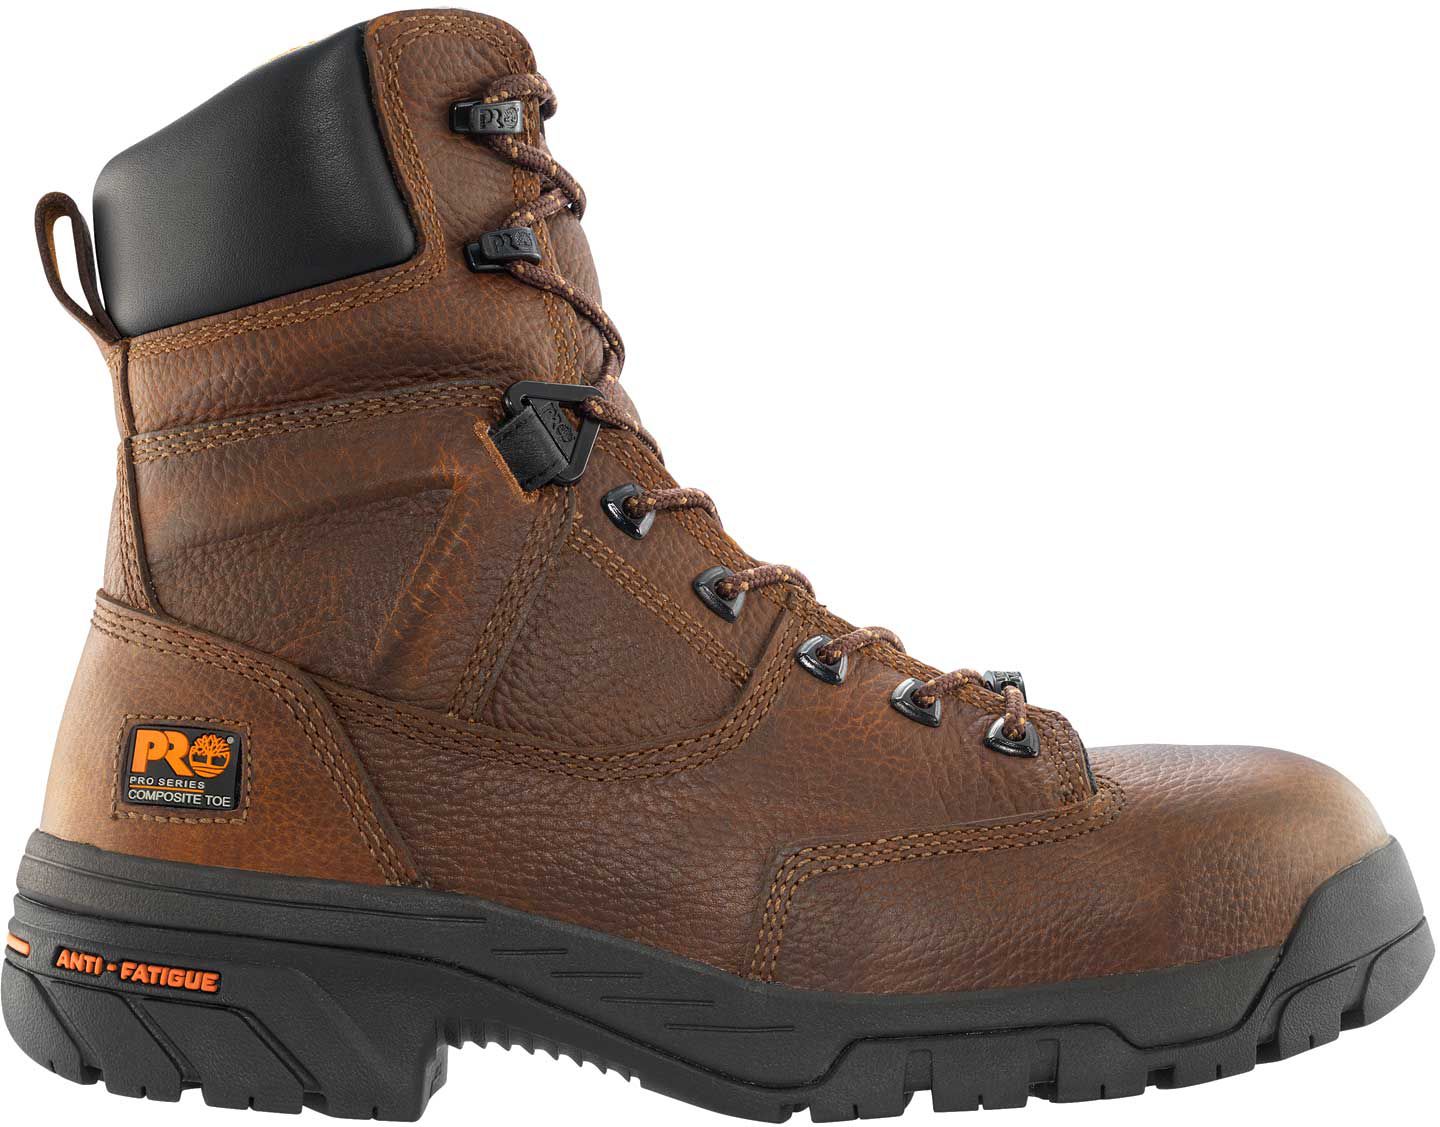 timberland pro titan composite toe work boots